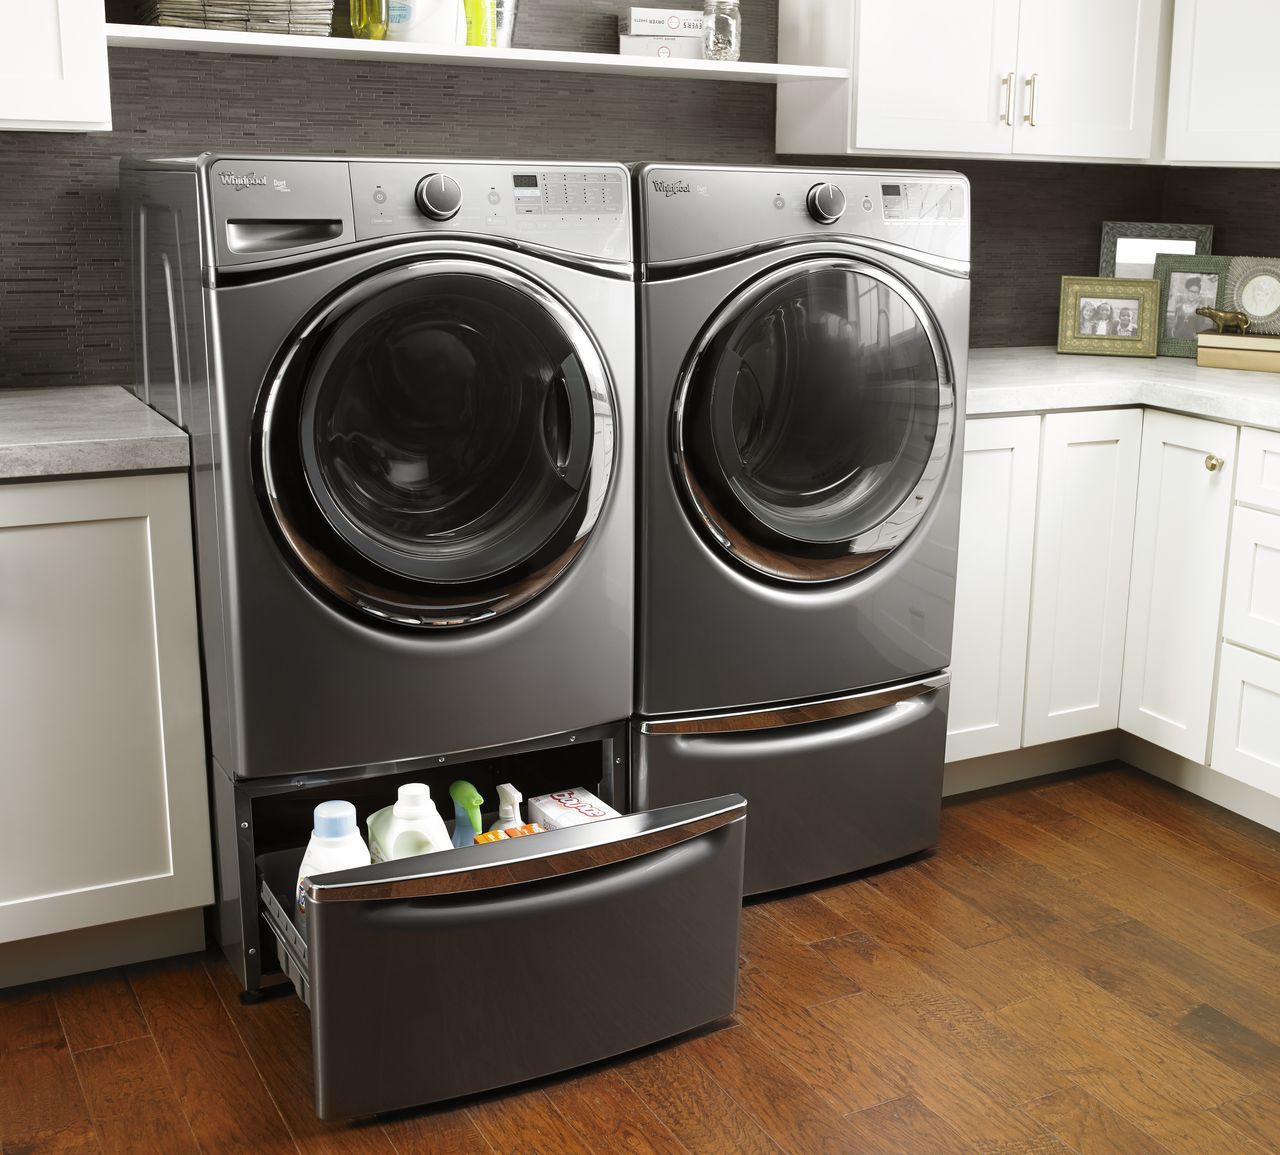 How To Clean A Whirlpool Duet Washer